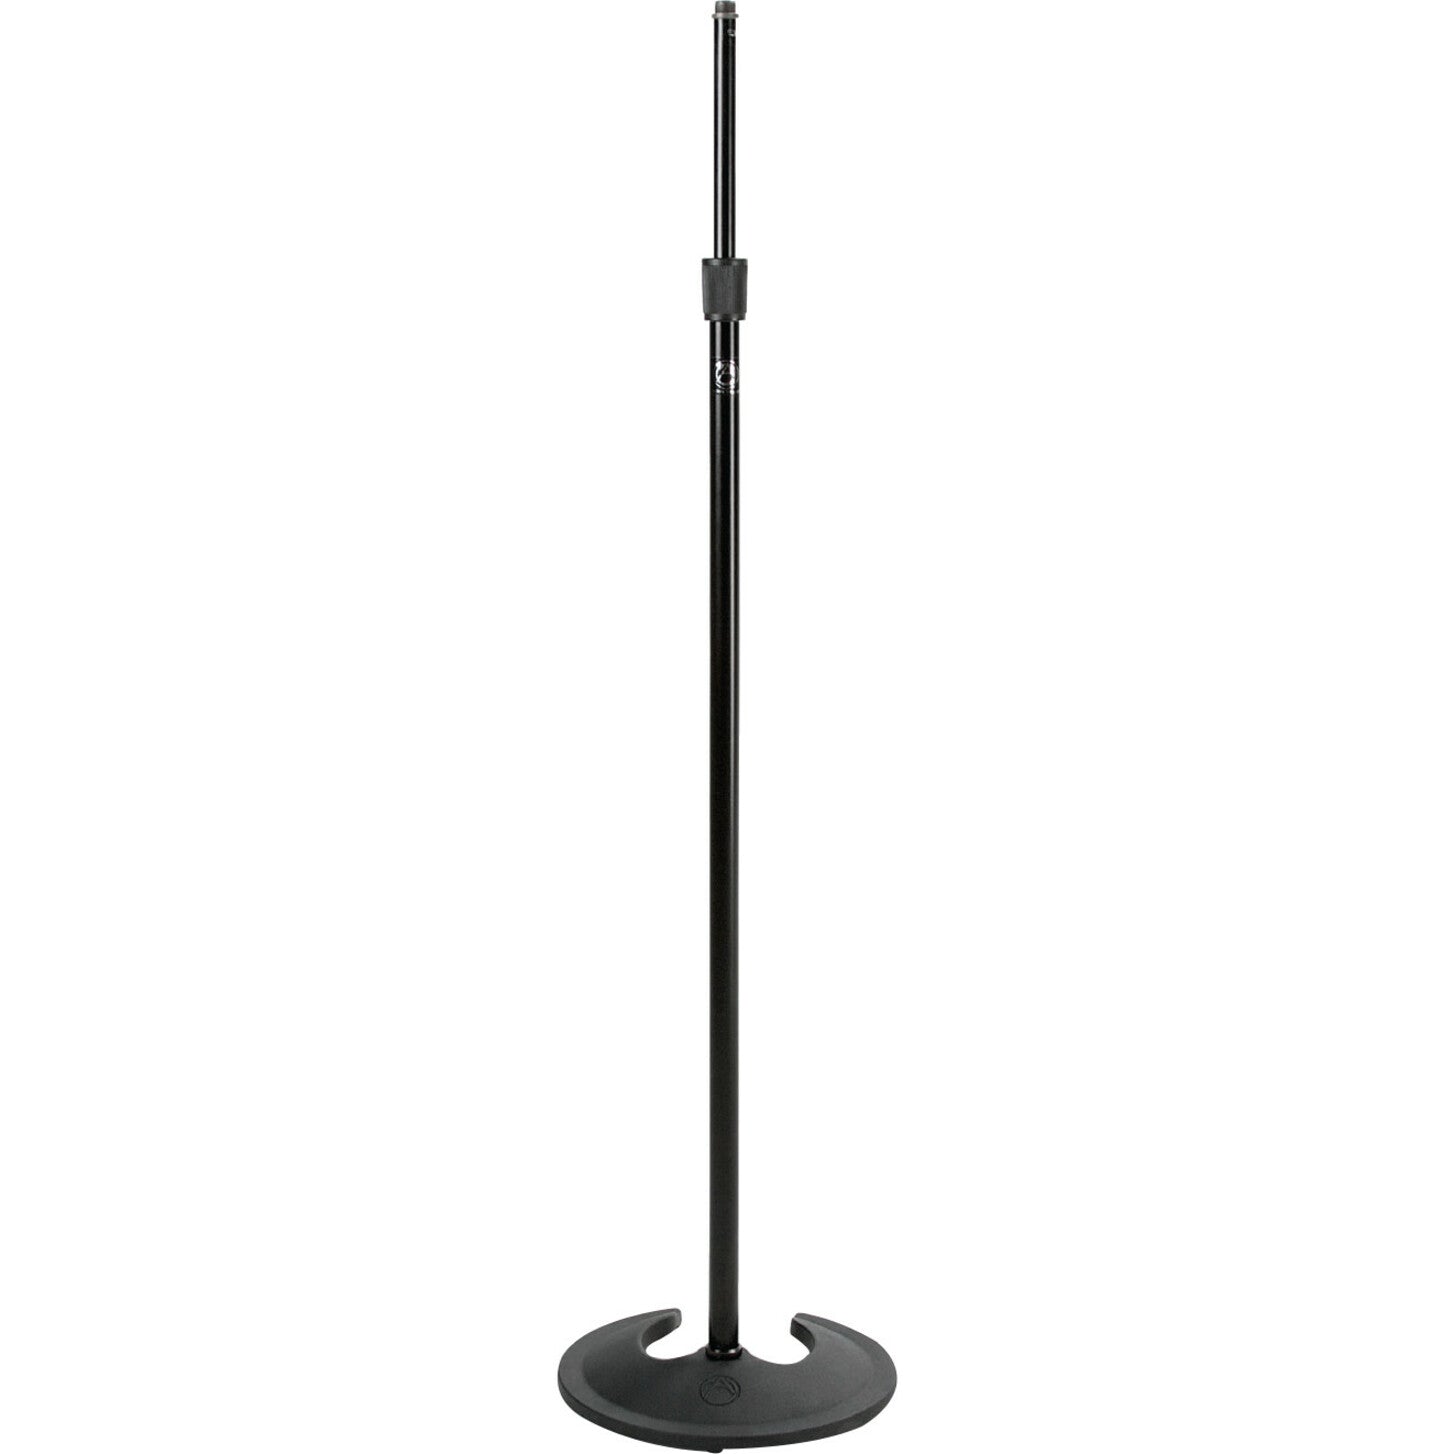 AtlasIED SMS5B Stackable Mic Stand with 10" Round Base - Ebony, Black